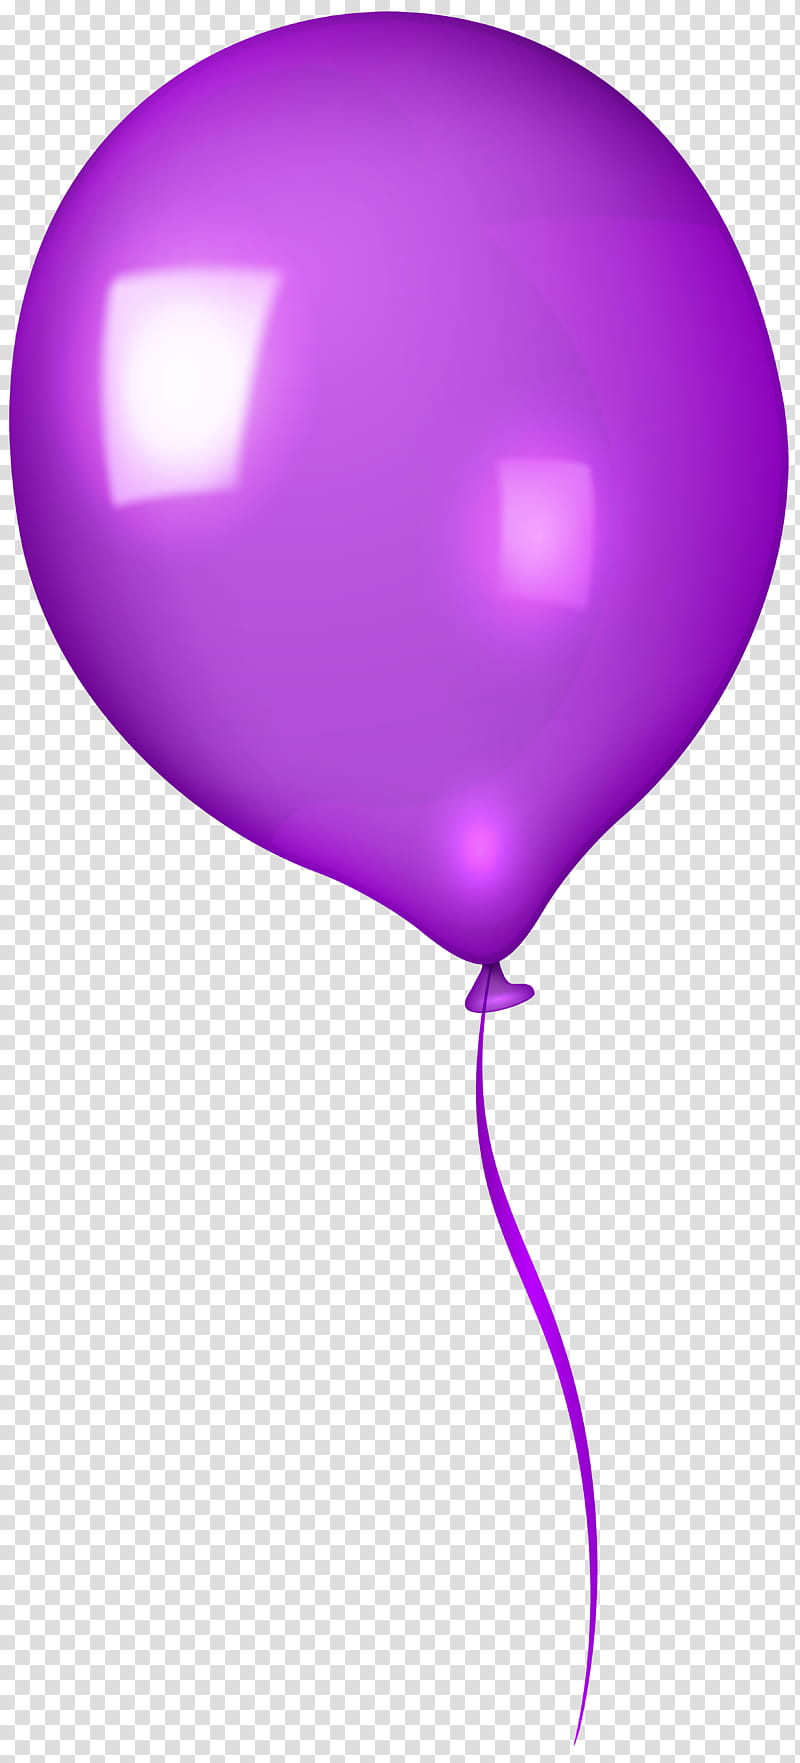 Birthday Party, Balloon, Balloon Modelling, Green Balloons, Birthday
, Toy Balloon, Violet, Purple transparent background PNG clipart